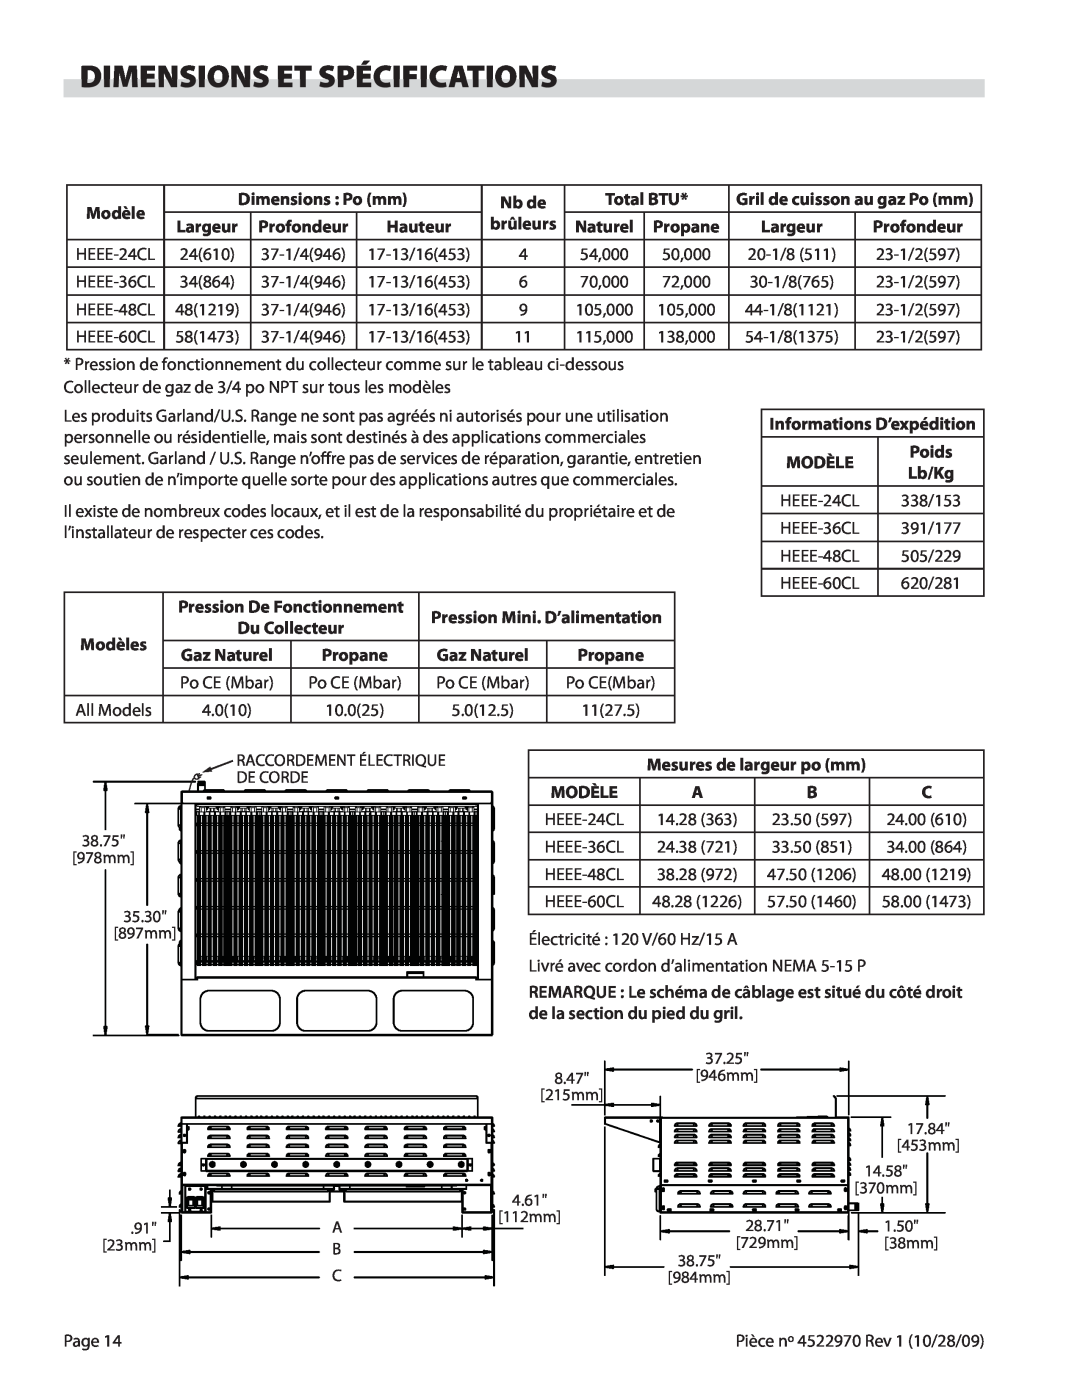 Garland 4522970 REV 1 operation manual Dimensions Et Spécifications 